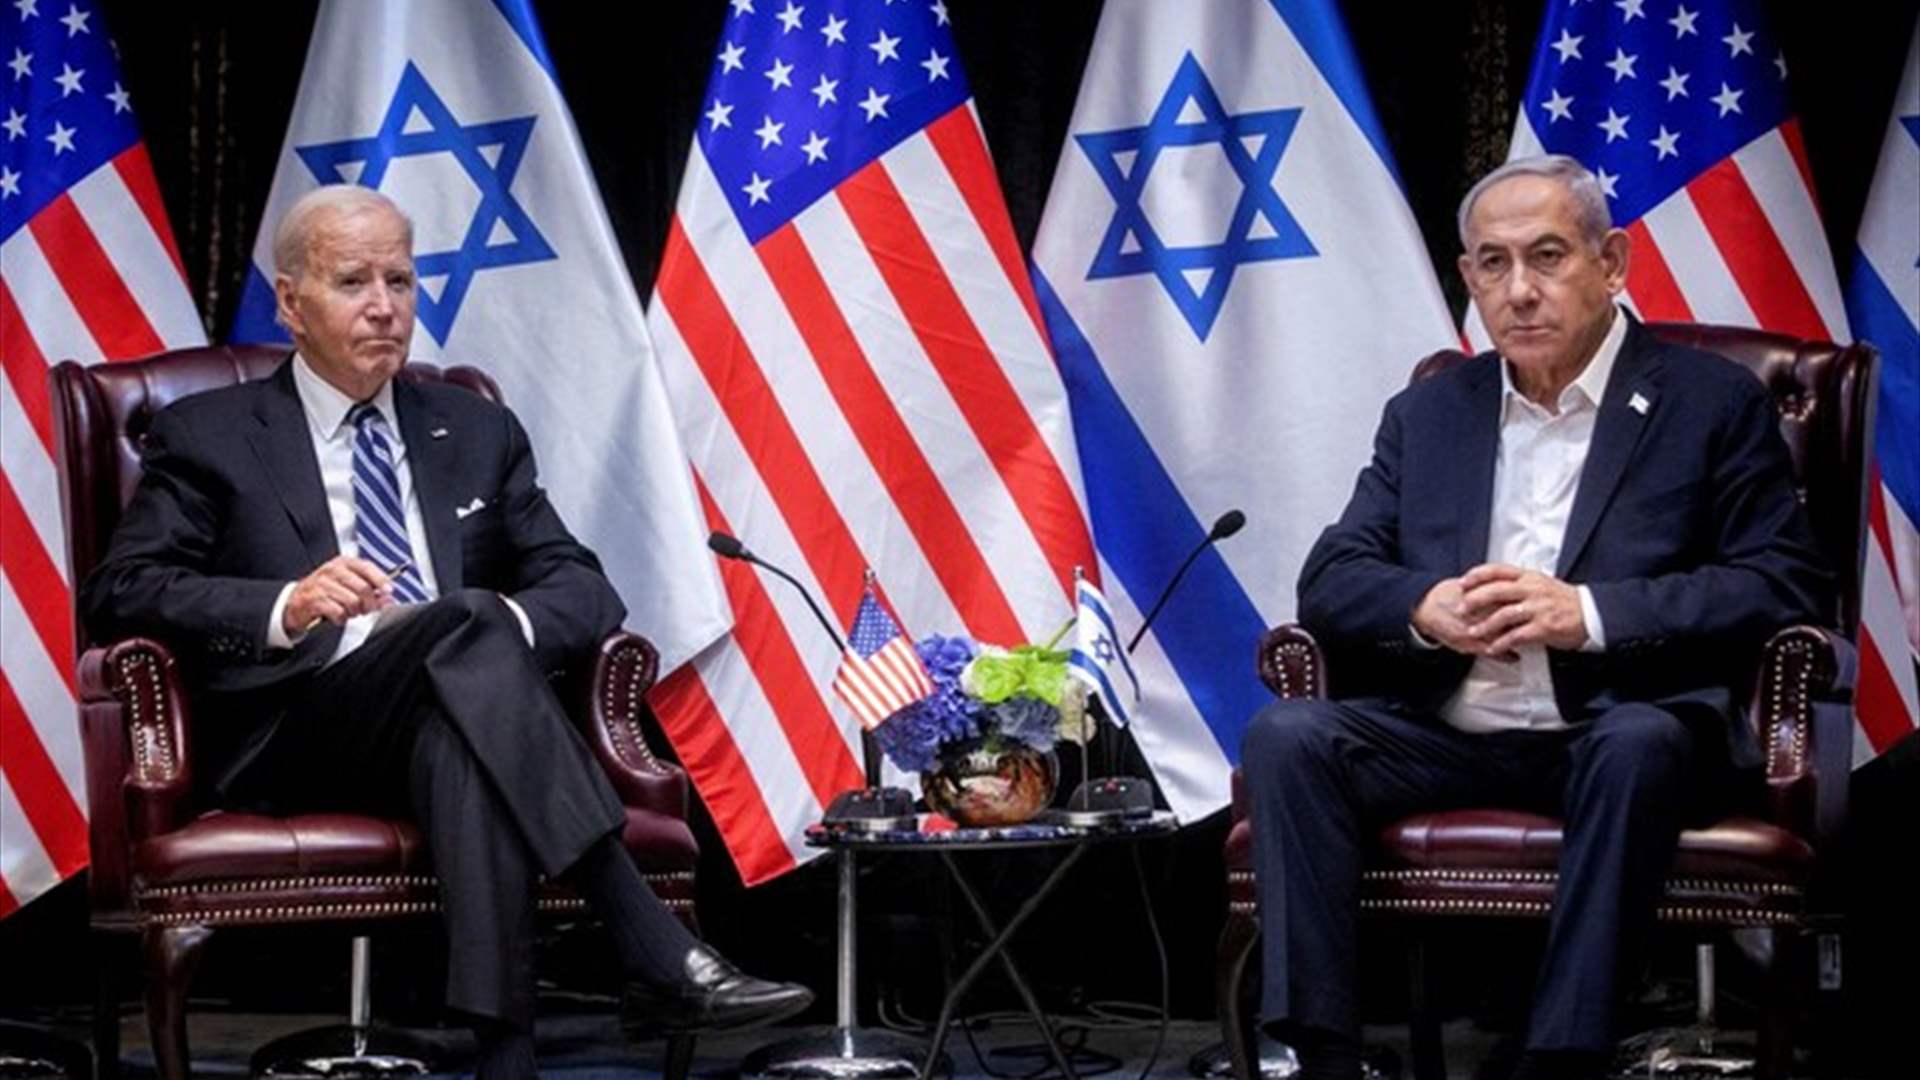 Diplomatic Disconnect: Silence Between Biden and Netanyahu Signals Strained Ties